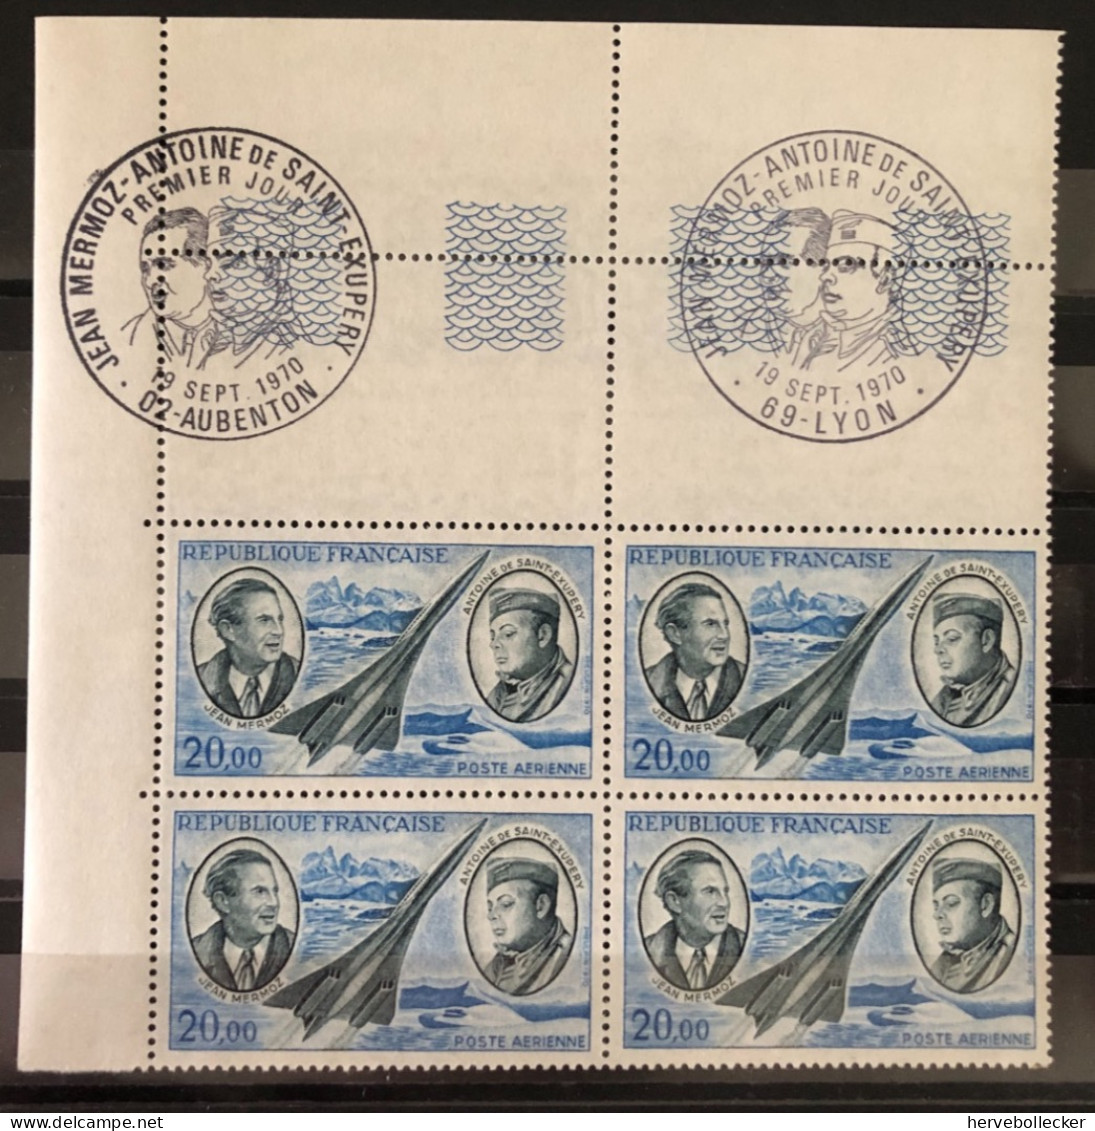 Bloc Timbres France - Poste Aérienne 1970 Yvert & Tellier N° 44d Neuf ** Gomme Tropicale - 1960-.... Mint/hinged